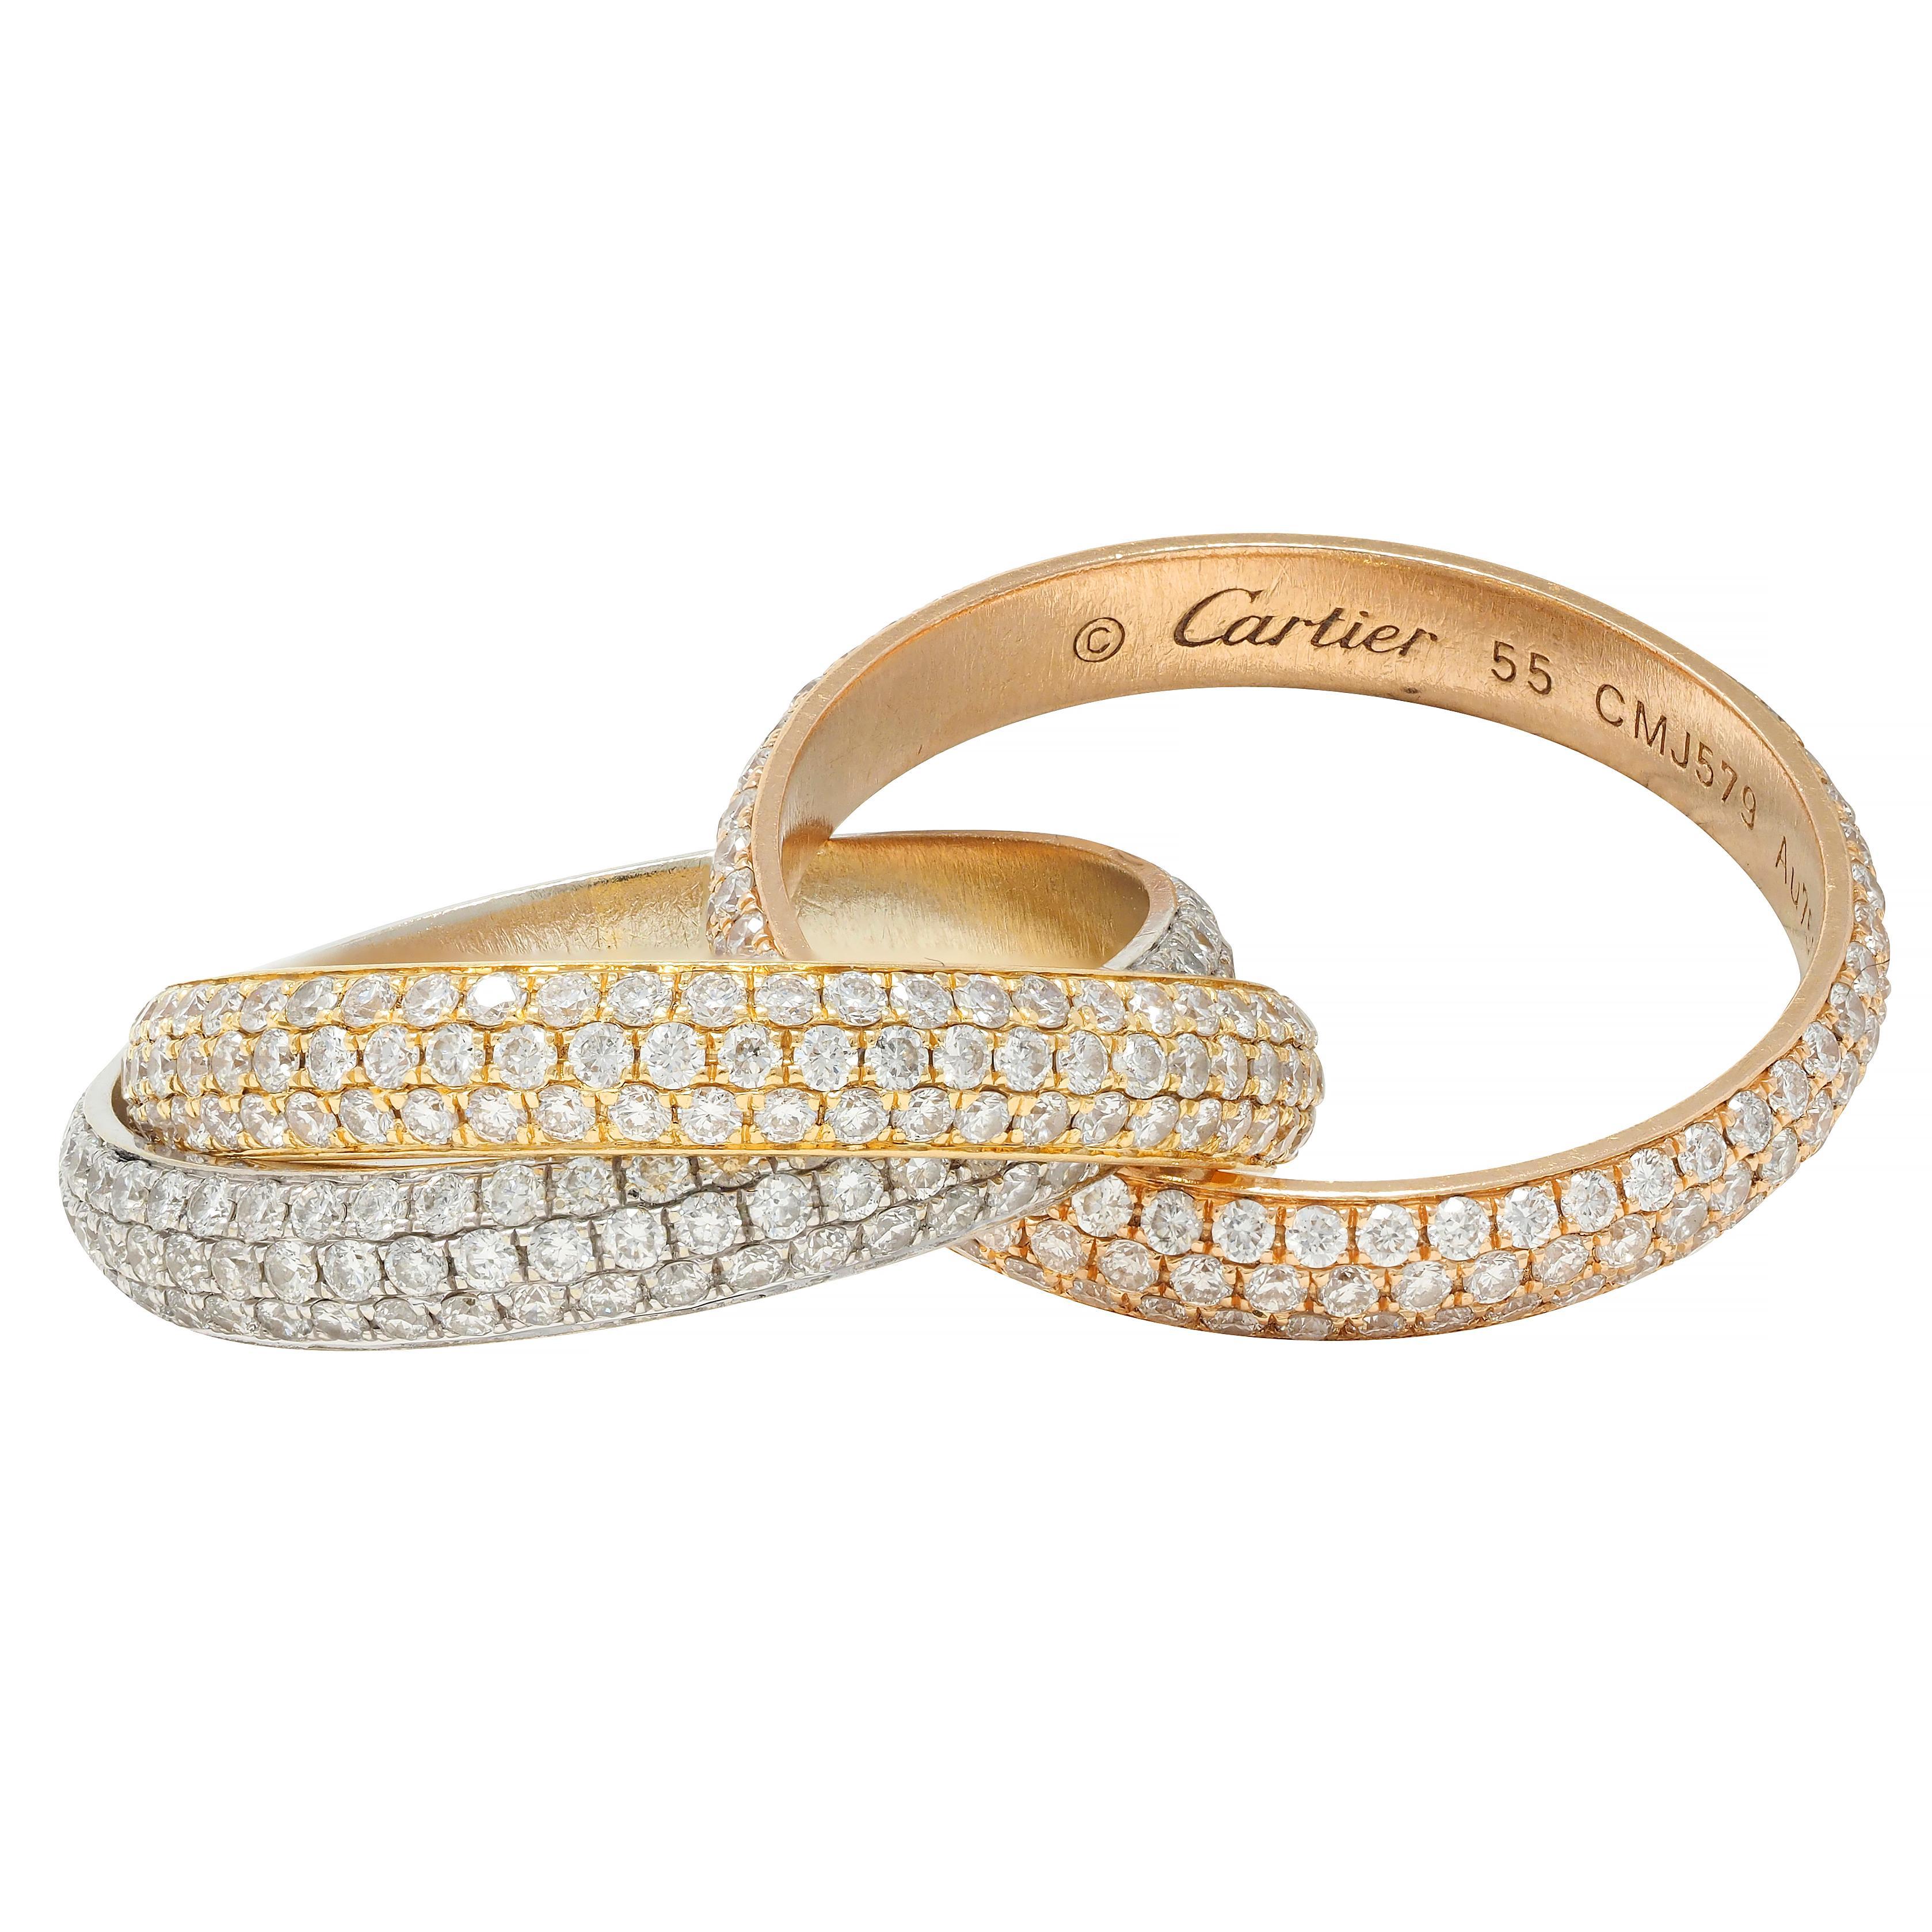 Women's or Men's Cartier 4.50 CTW Diamond 18 Karat Tri-Colored Gold Rolling Trinity Band Ring For Sale